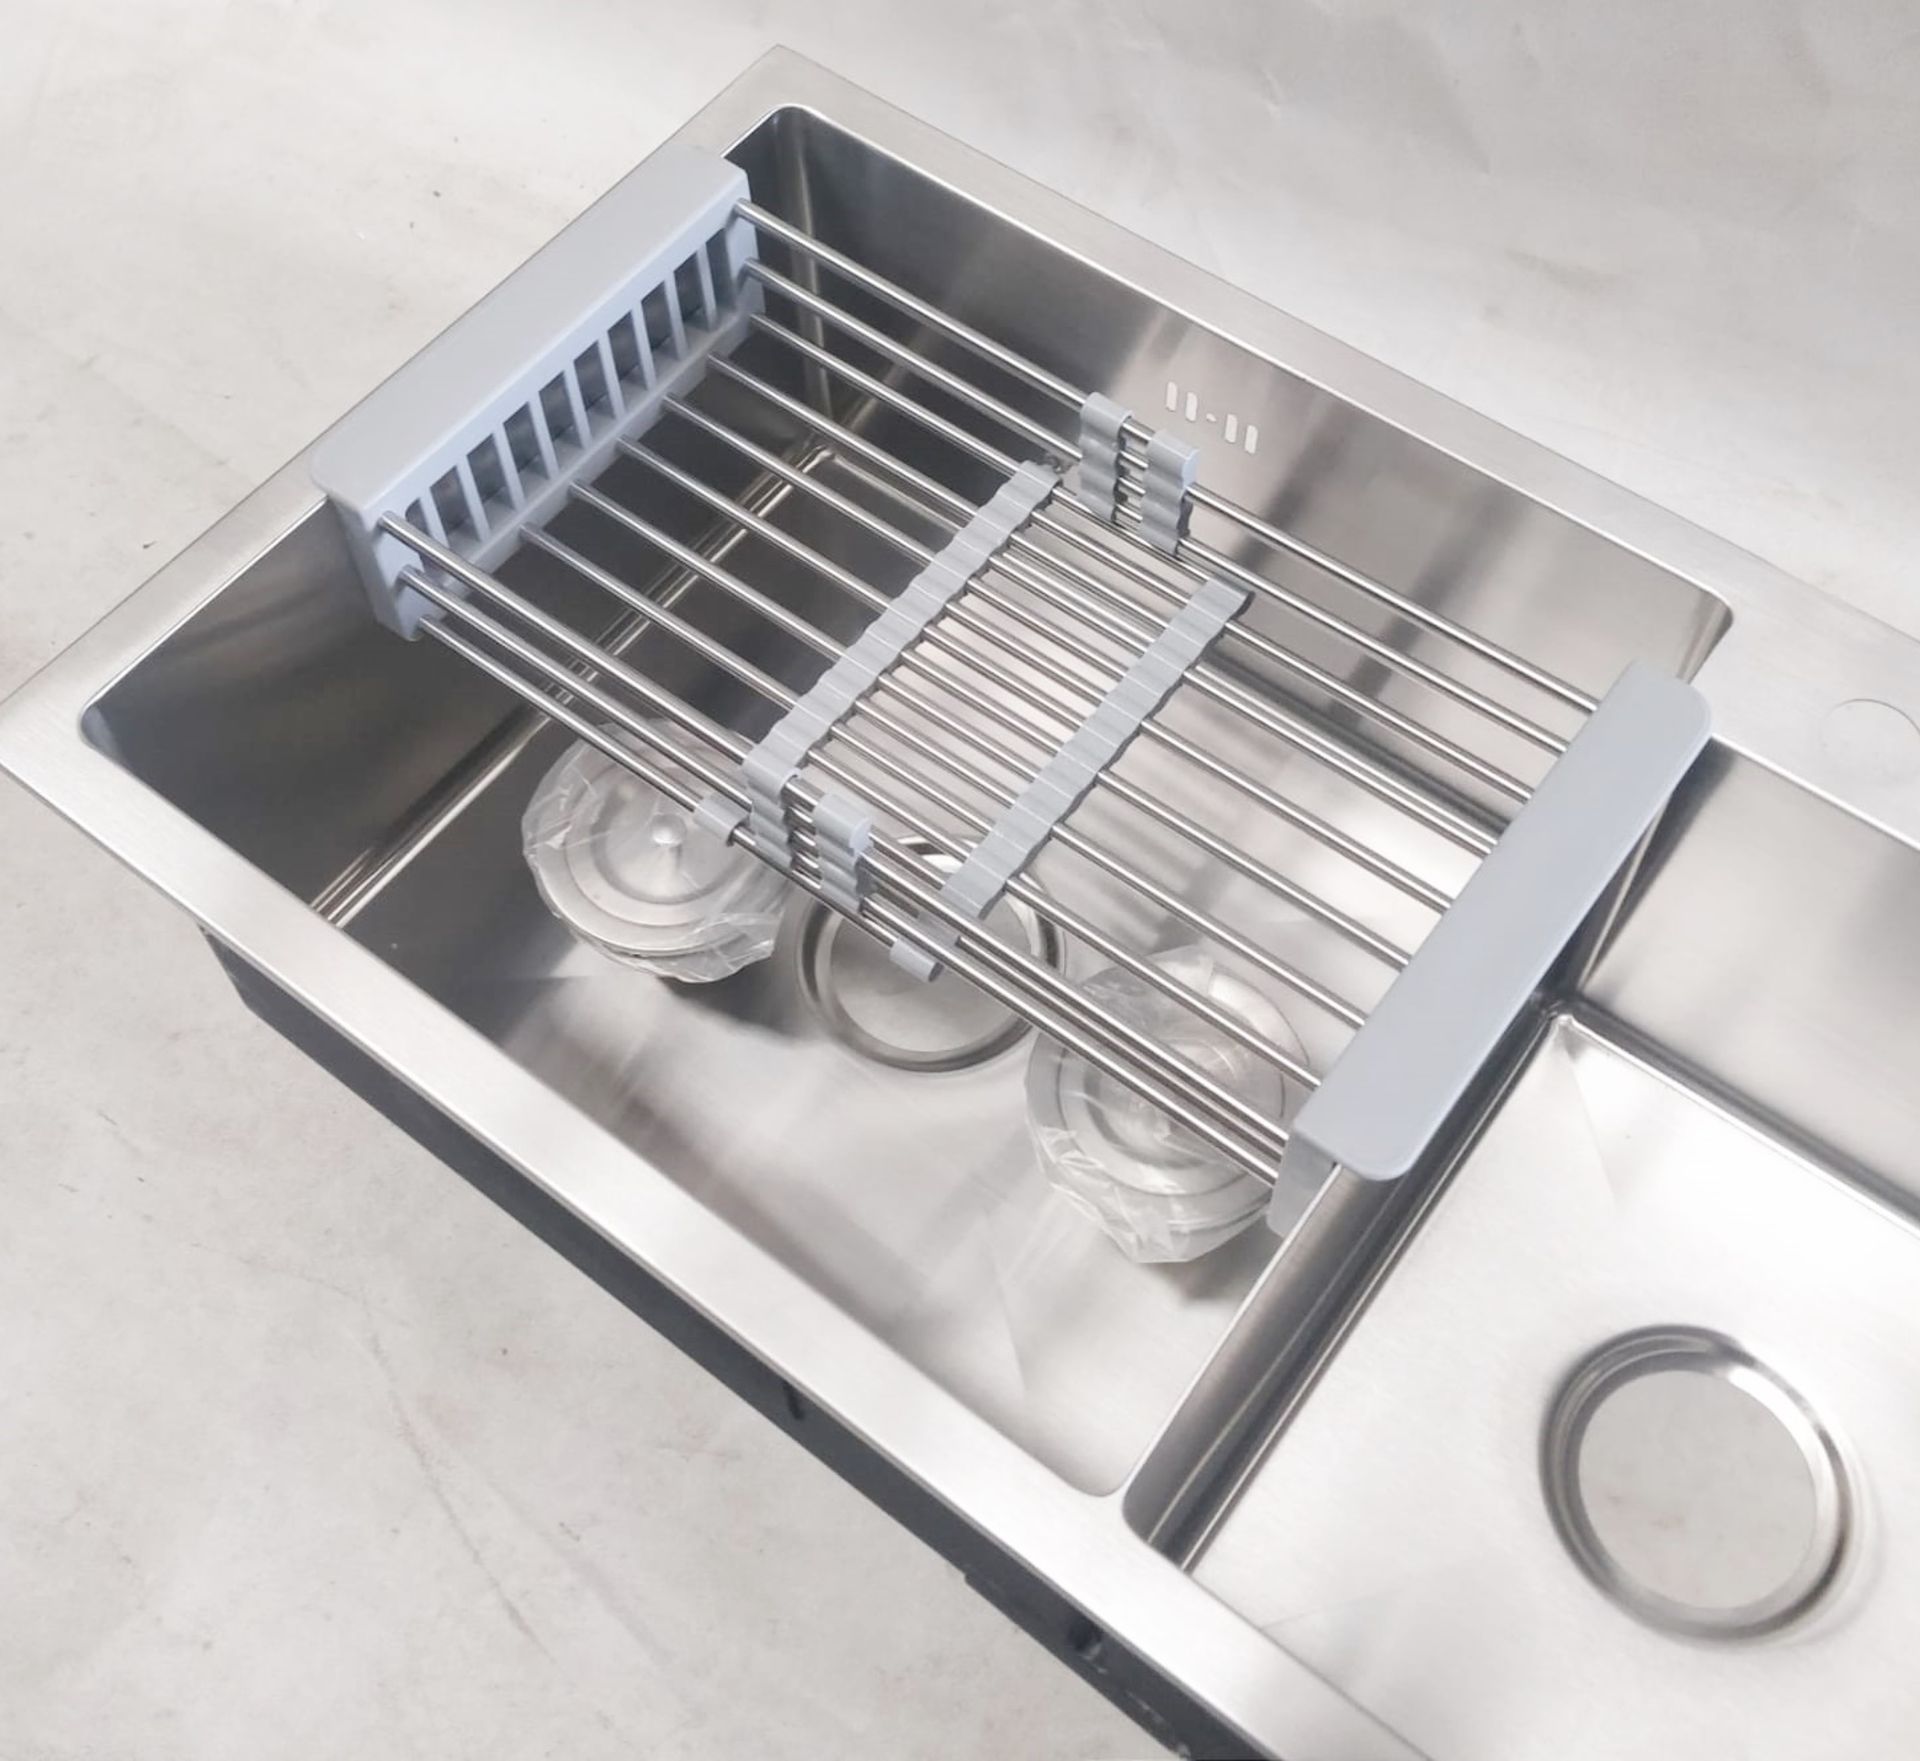 1 x Twin Bowl Contemporary Kitchen Sink Basin - Stainless Steel Finish - Model KS0059 - Includes - Image 6 of 16